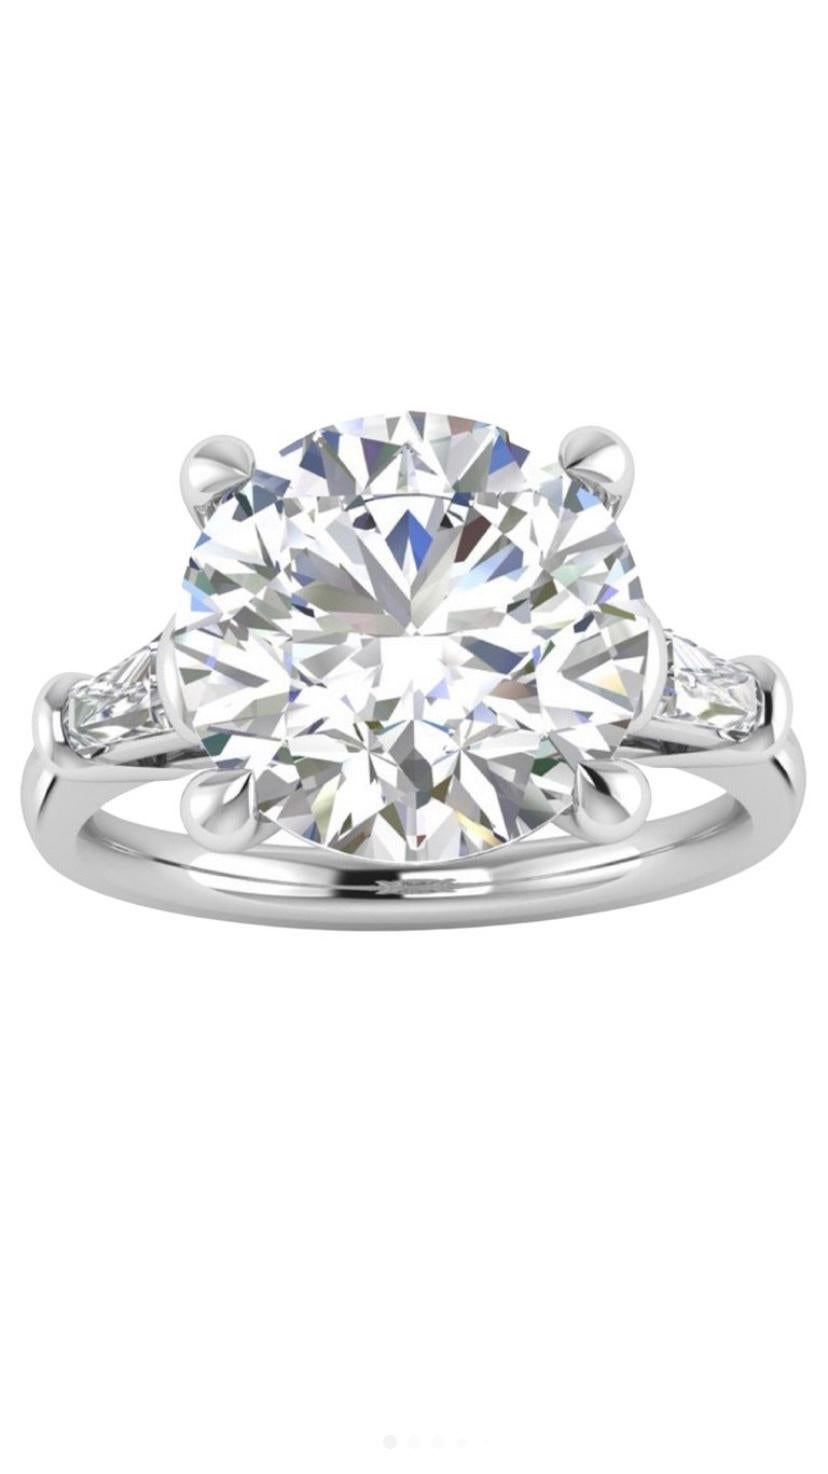 Women's or Men's No Reserve, IGI Certified 5 Ct of Diamond on Solitaire Ring